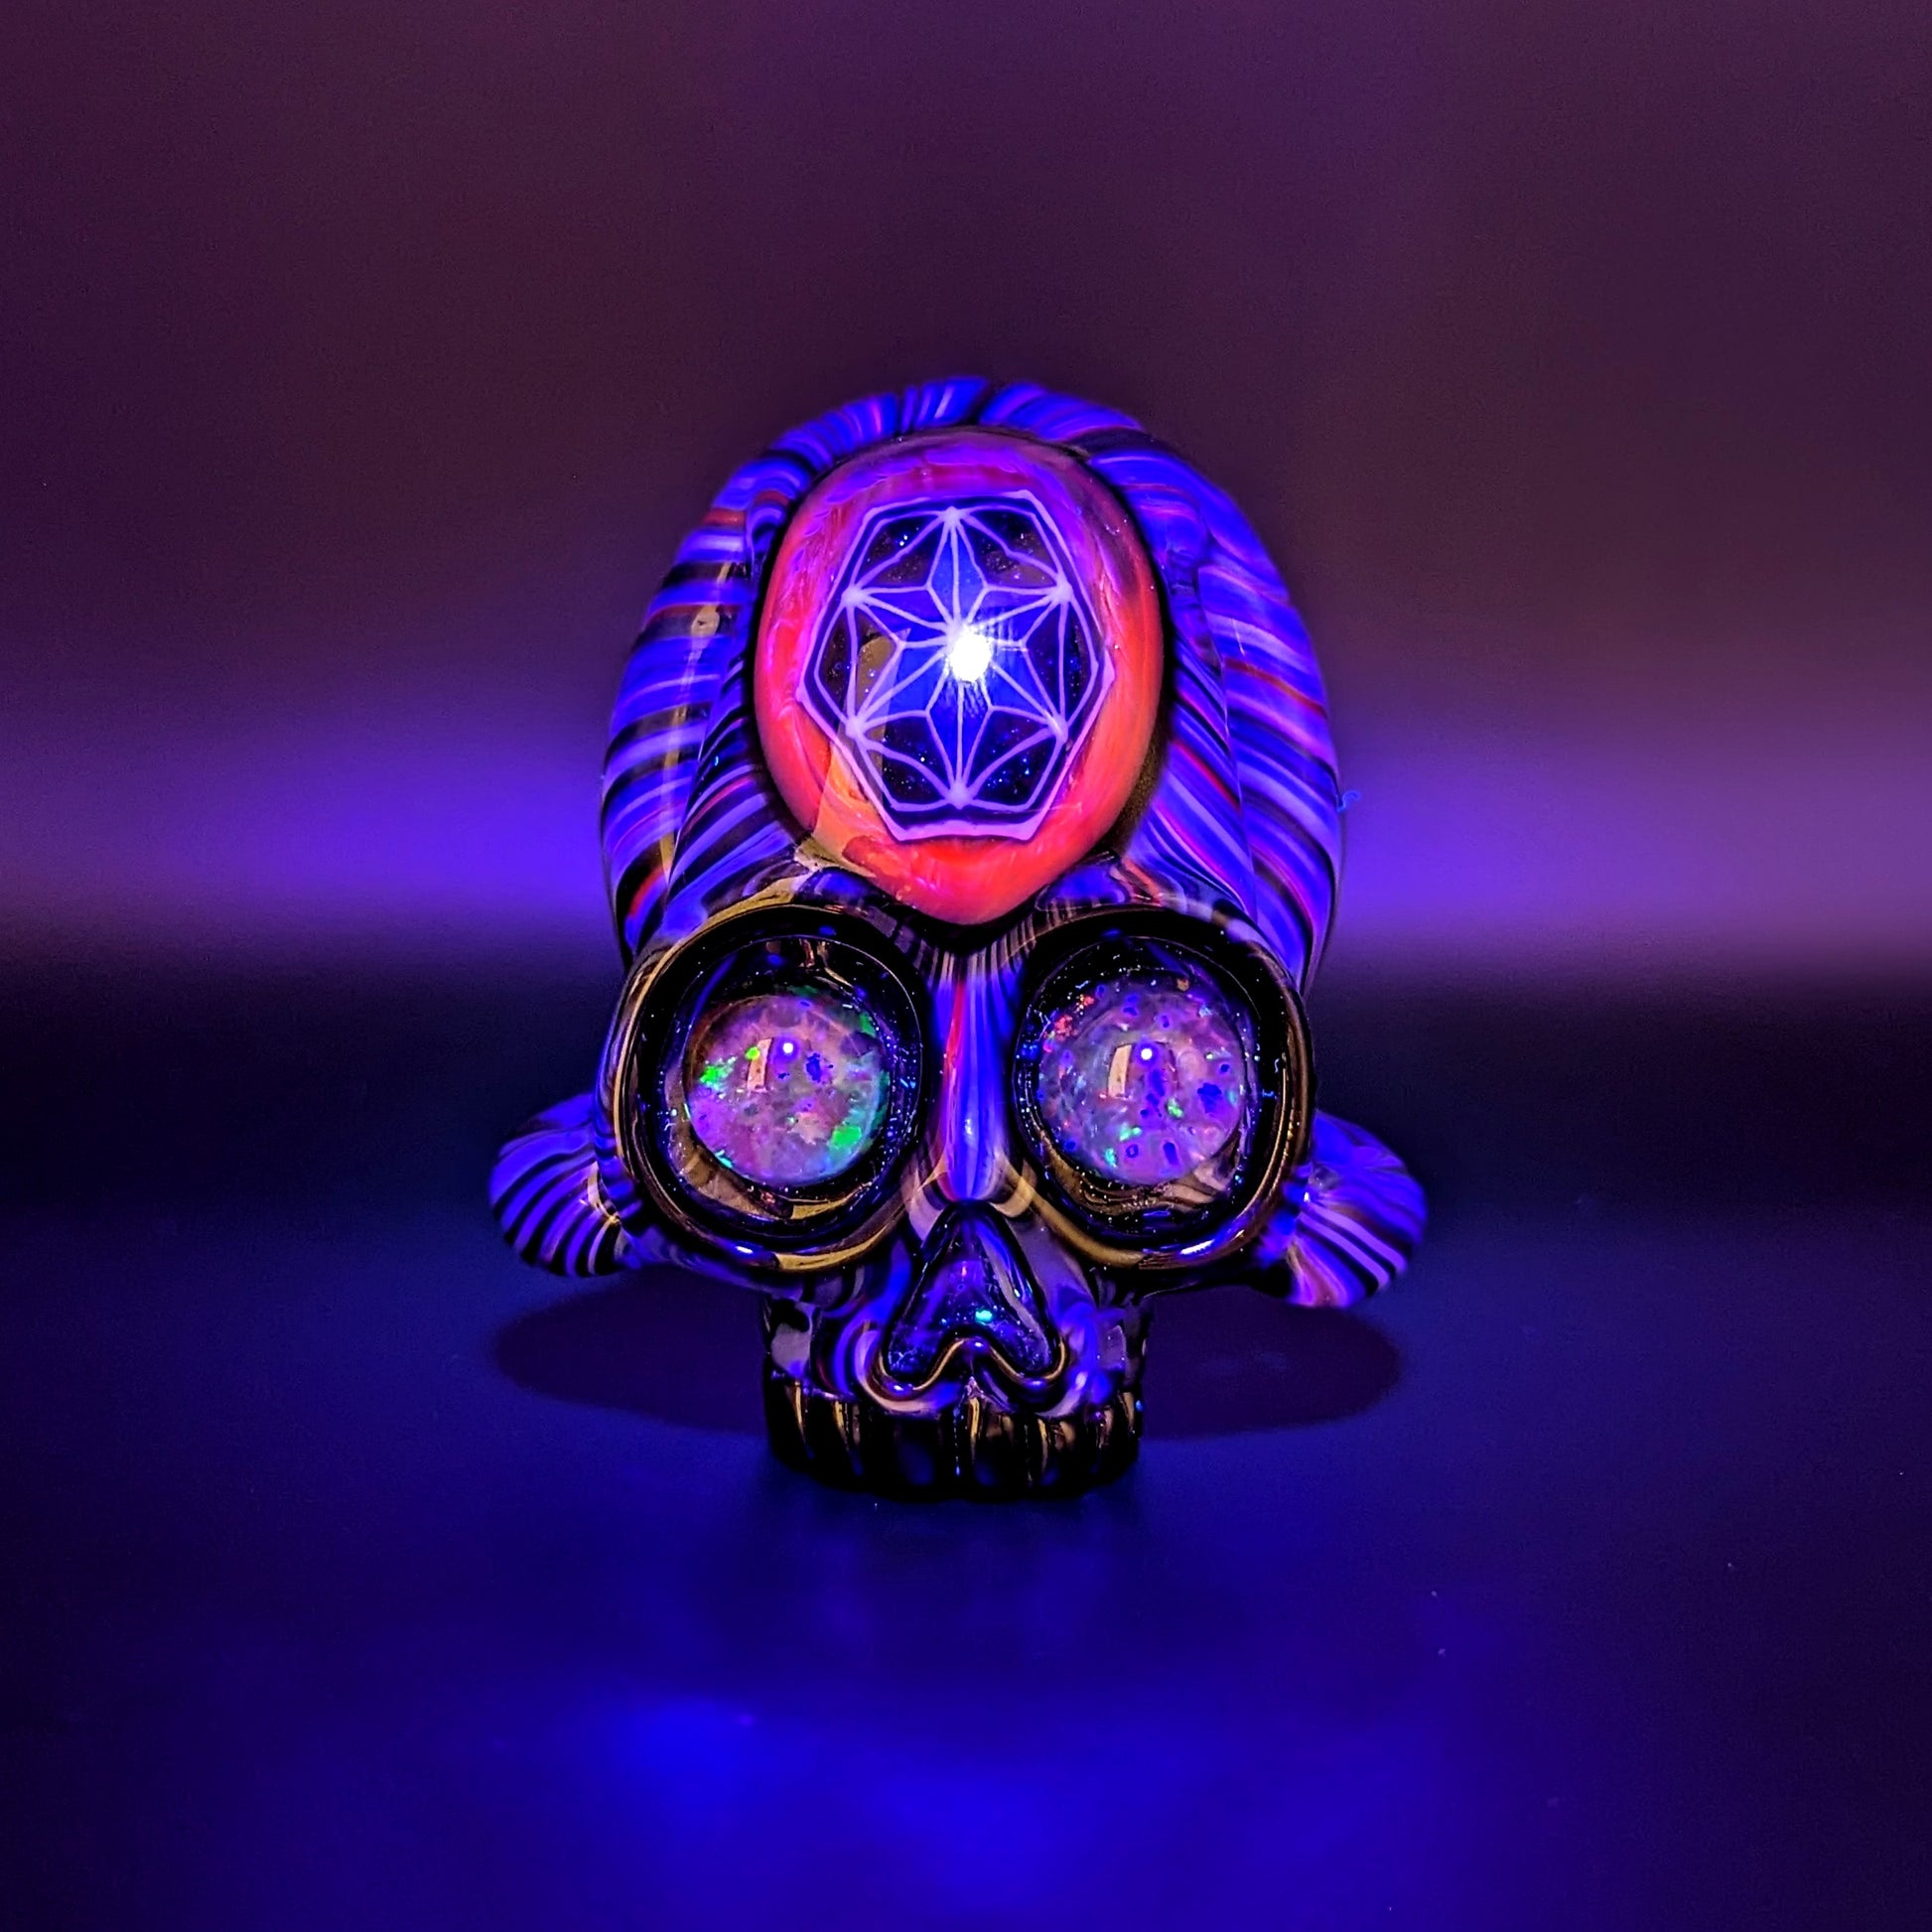 AKM x Akio Skull, 2018 Borosilicate Glass Pendant with Opal Eyes Approx. 2.4 x 2.4 in  Hand blown glass made by AKM and Akio. Signed "AKM" + Dated "2018"